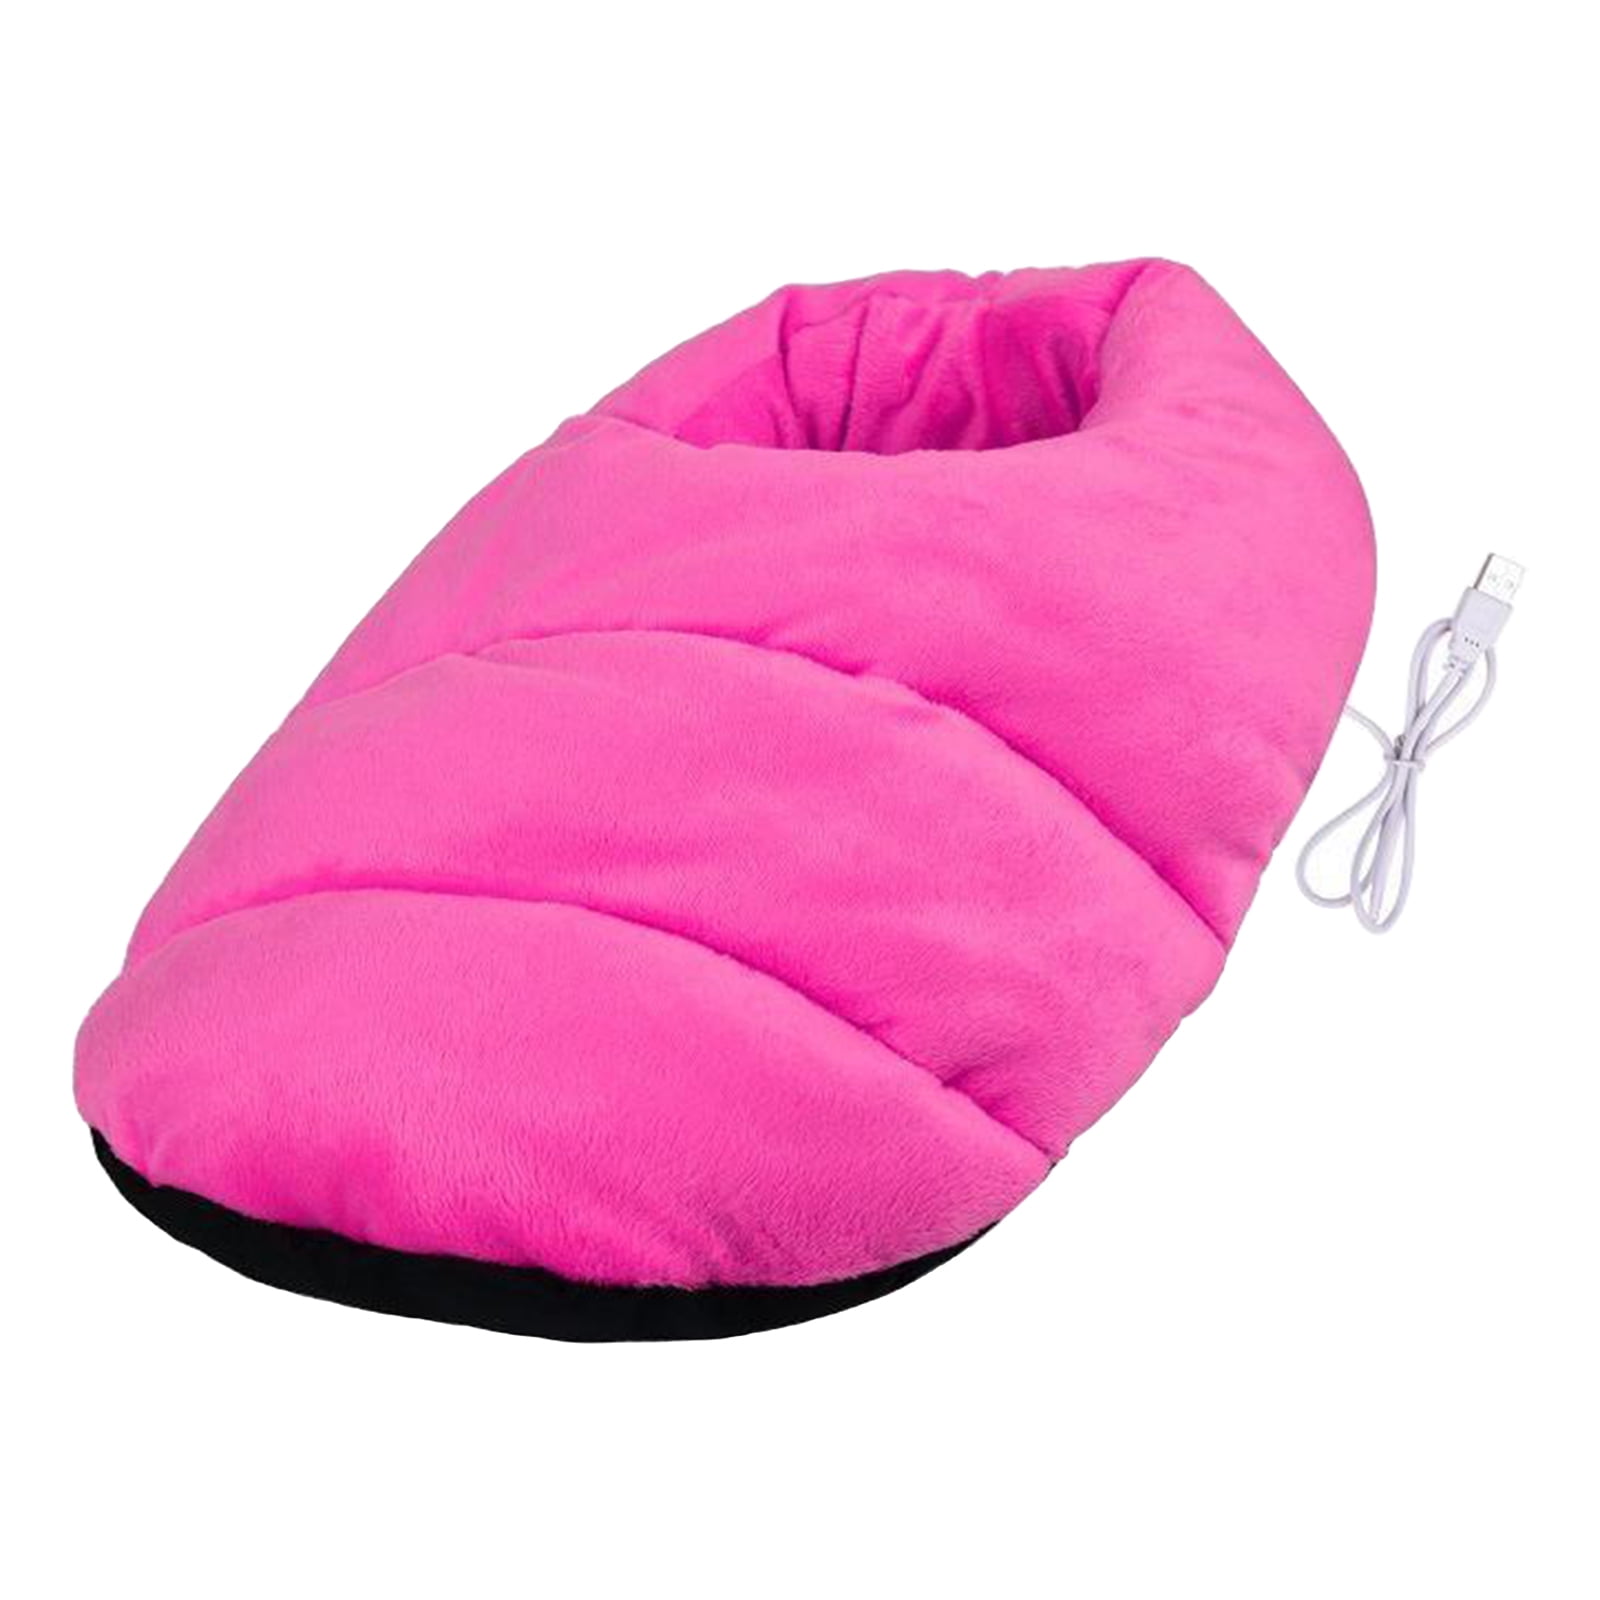 Details about   USB Foot Warmer Heating Pad Warm Cushion Winter Electric Pads Foot Warmer Pad SG 